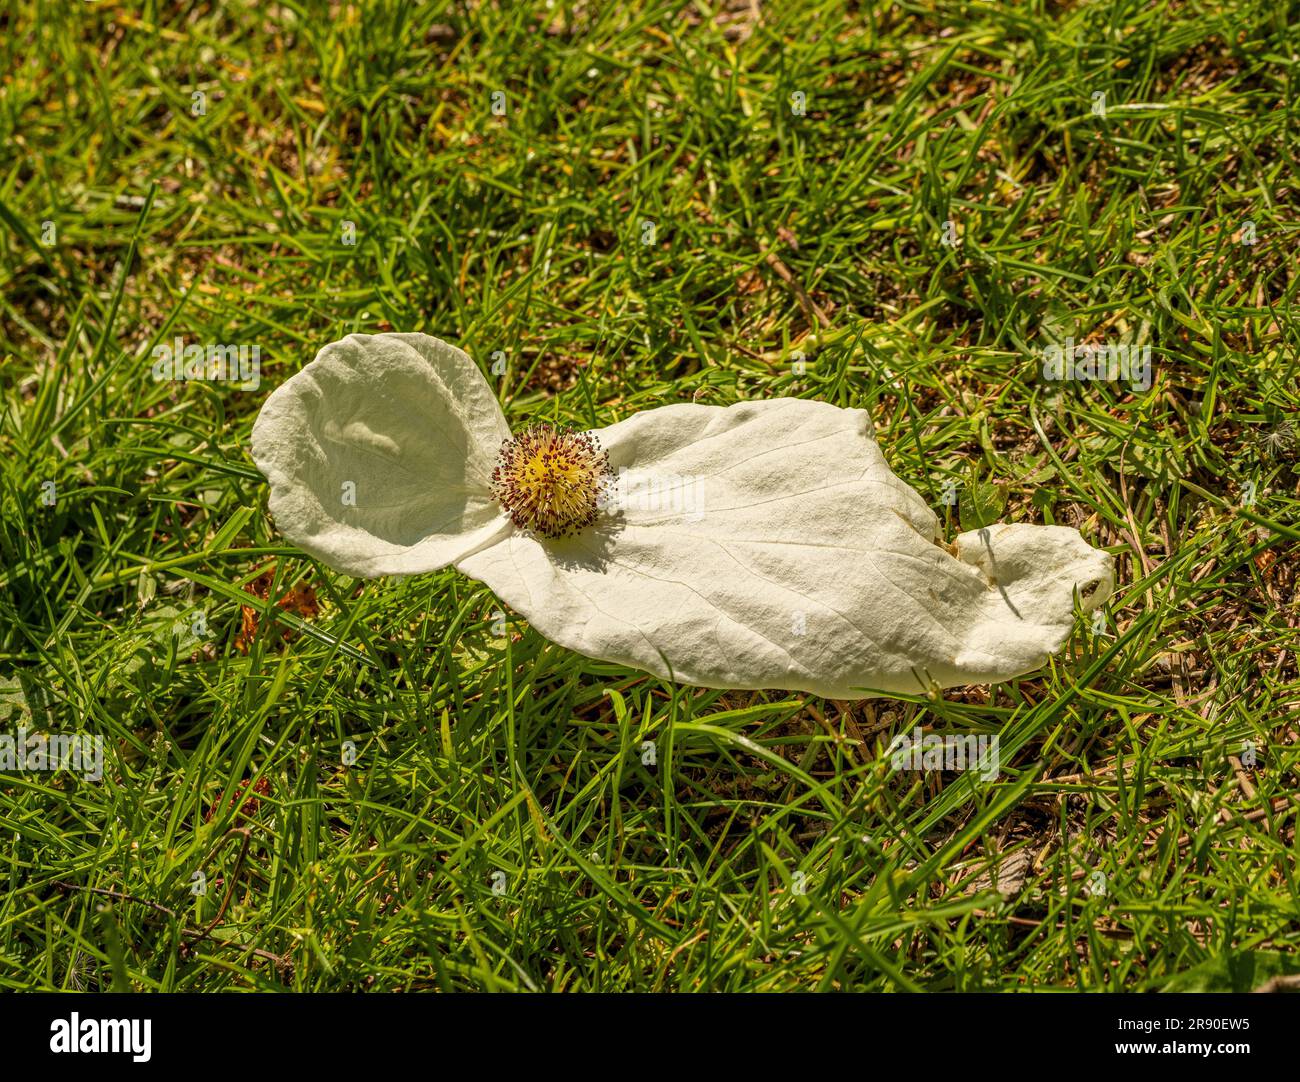 Creamy-white bracts surrounding the flowerhead fallen from a Handkerchief tree onto the ground below. Stock Photo